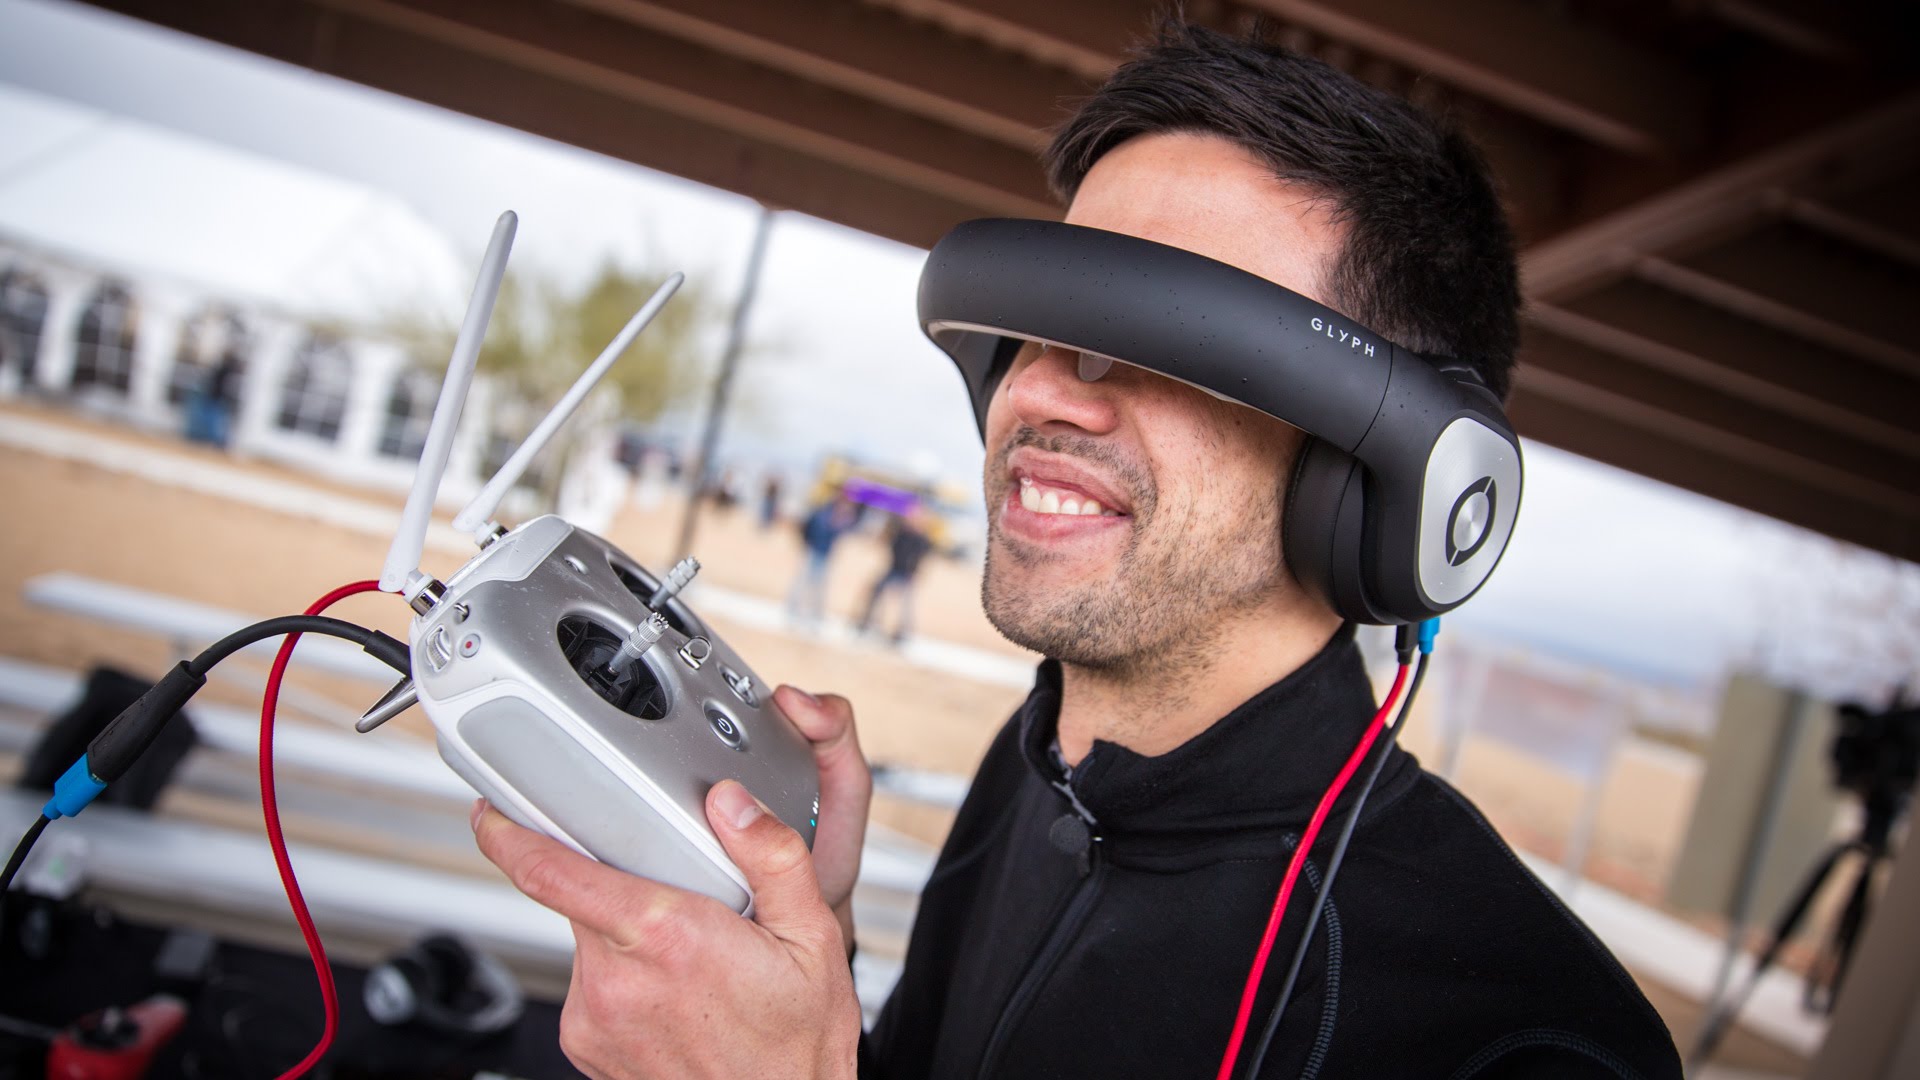 Flying FPV Drones with Avegant Glyph Retinal Headset